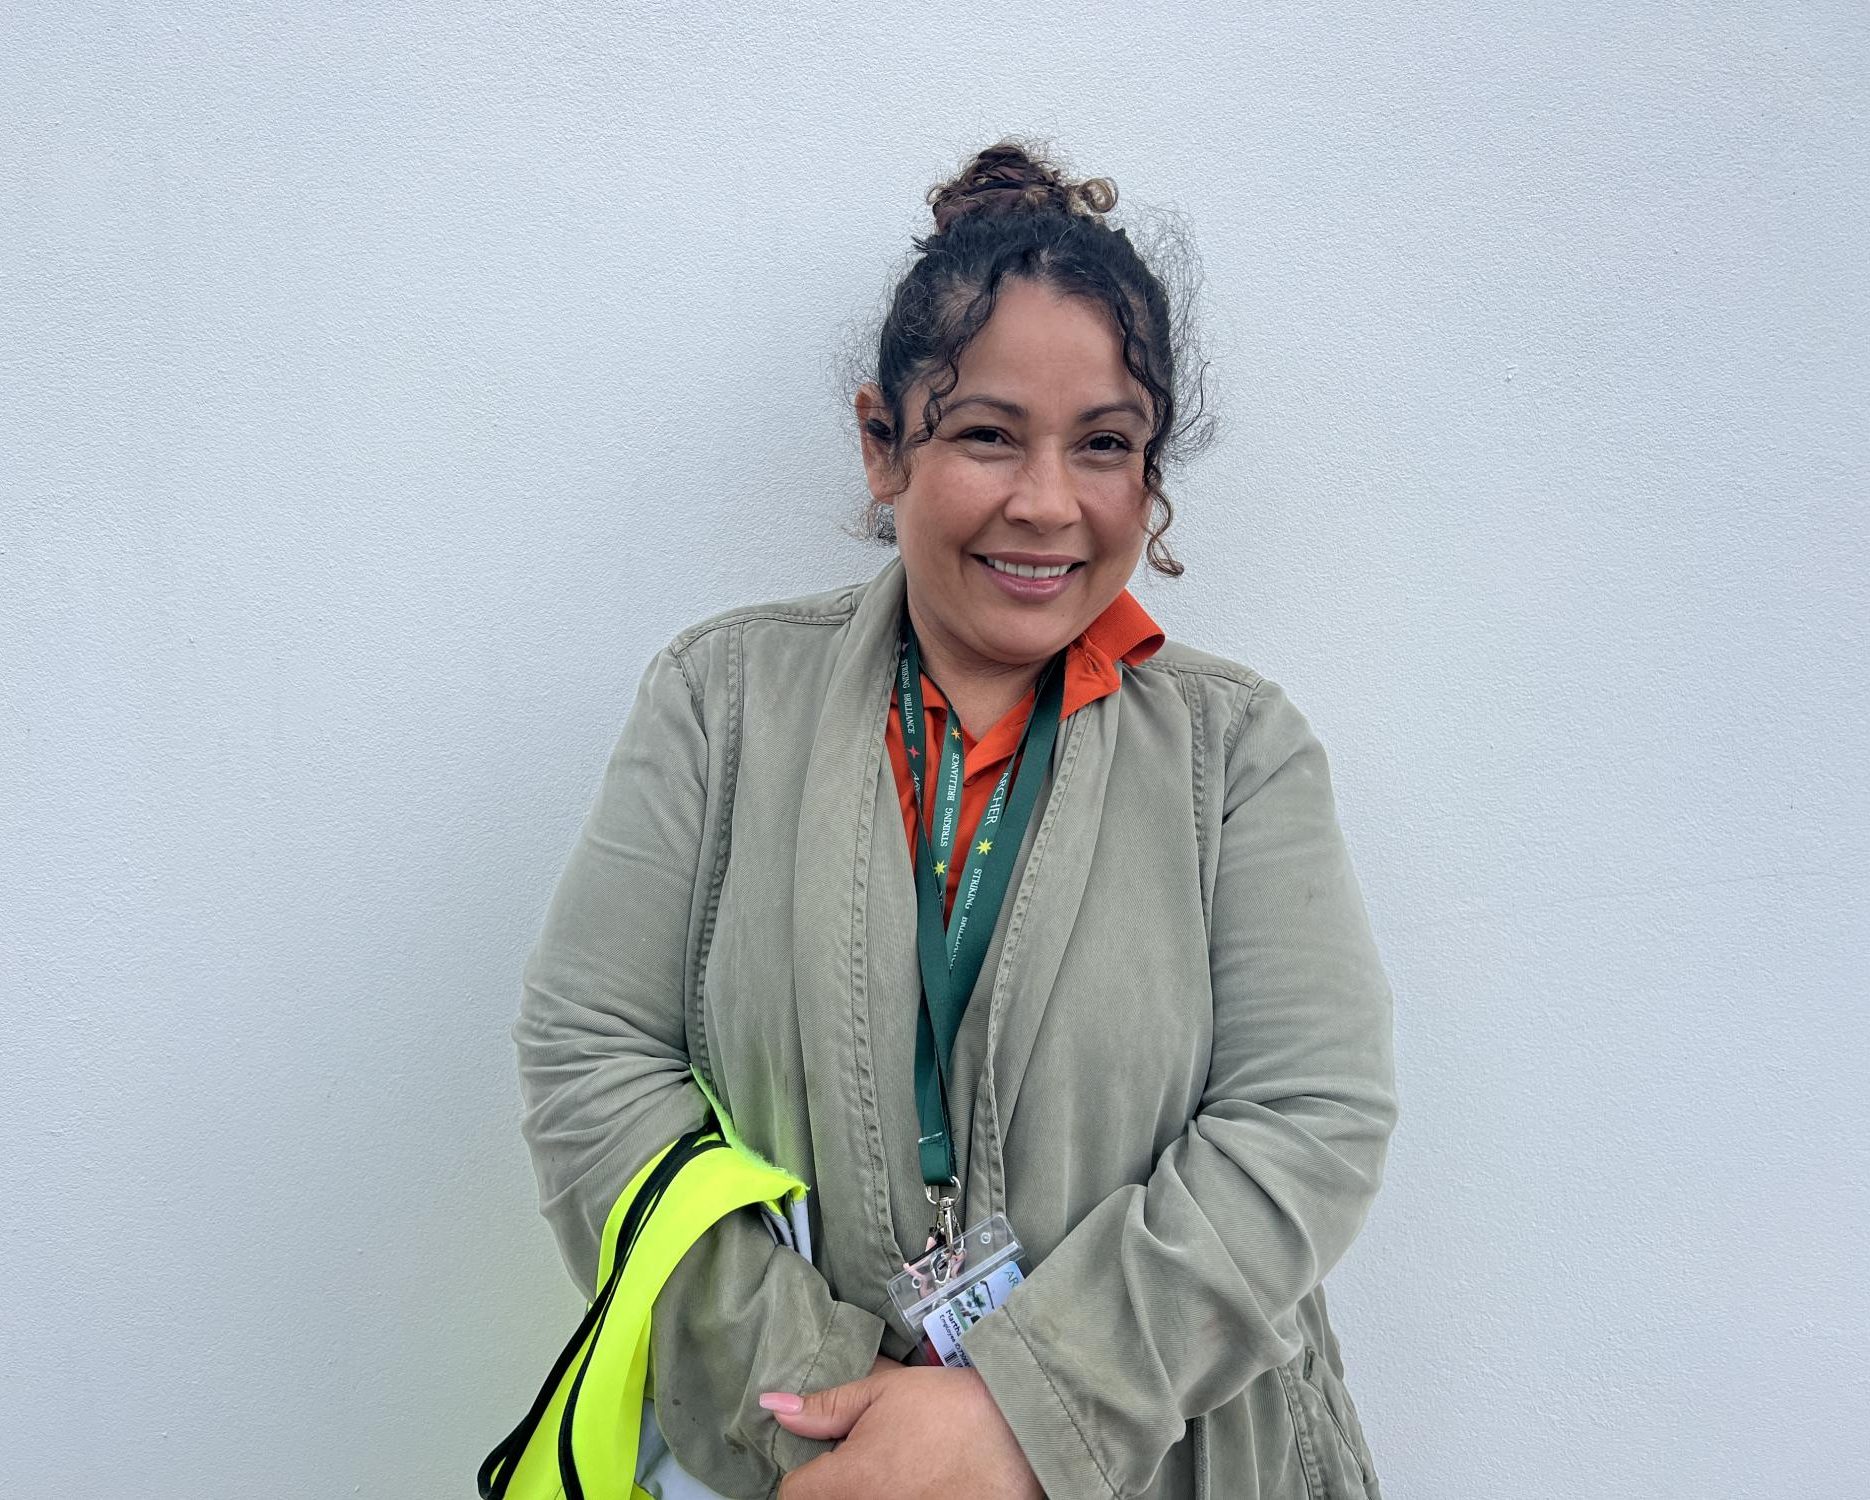 Facilities staff member Martha Sorto poses while on security duty in the north parking lot. She said her job in a diverse all-girls environment has been a new and exciting experience.